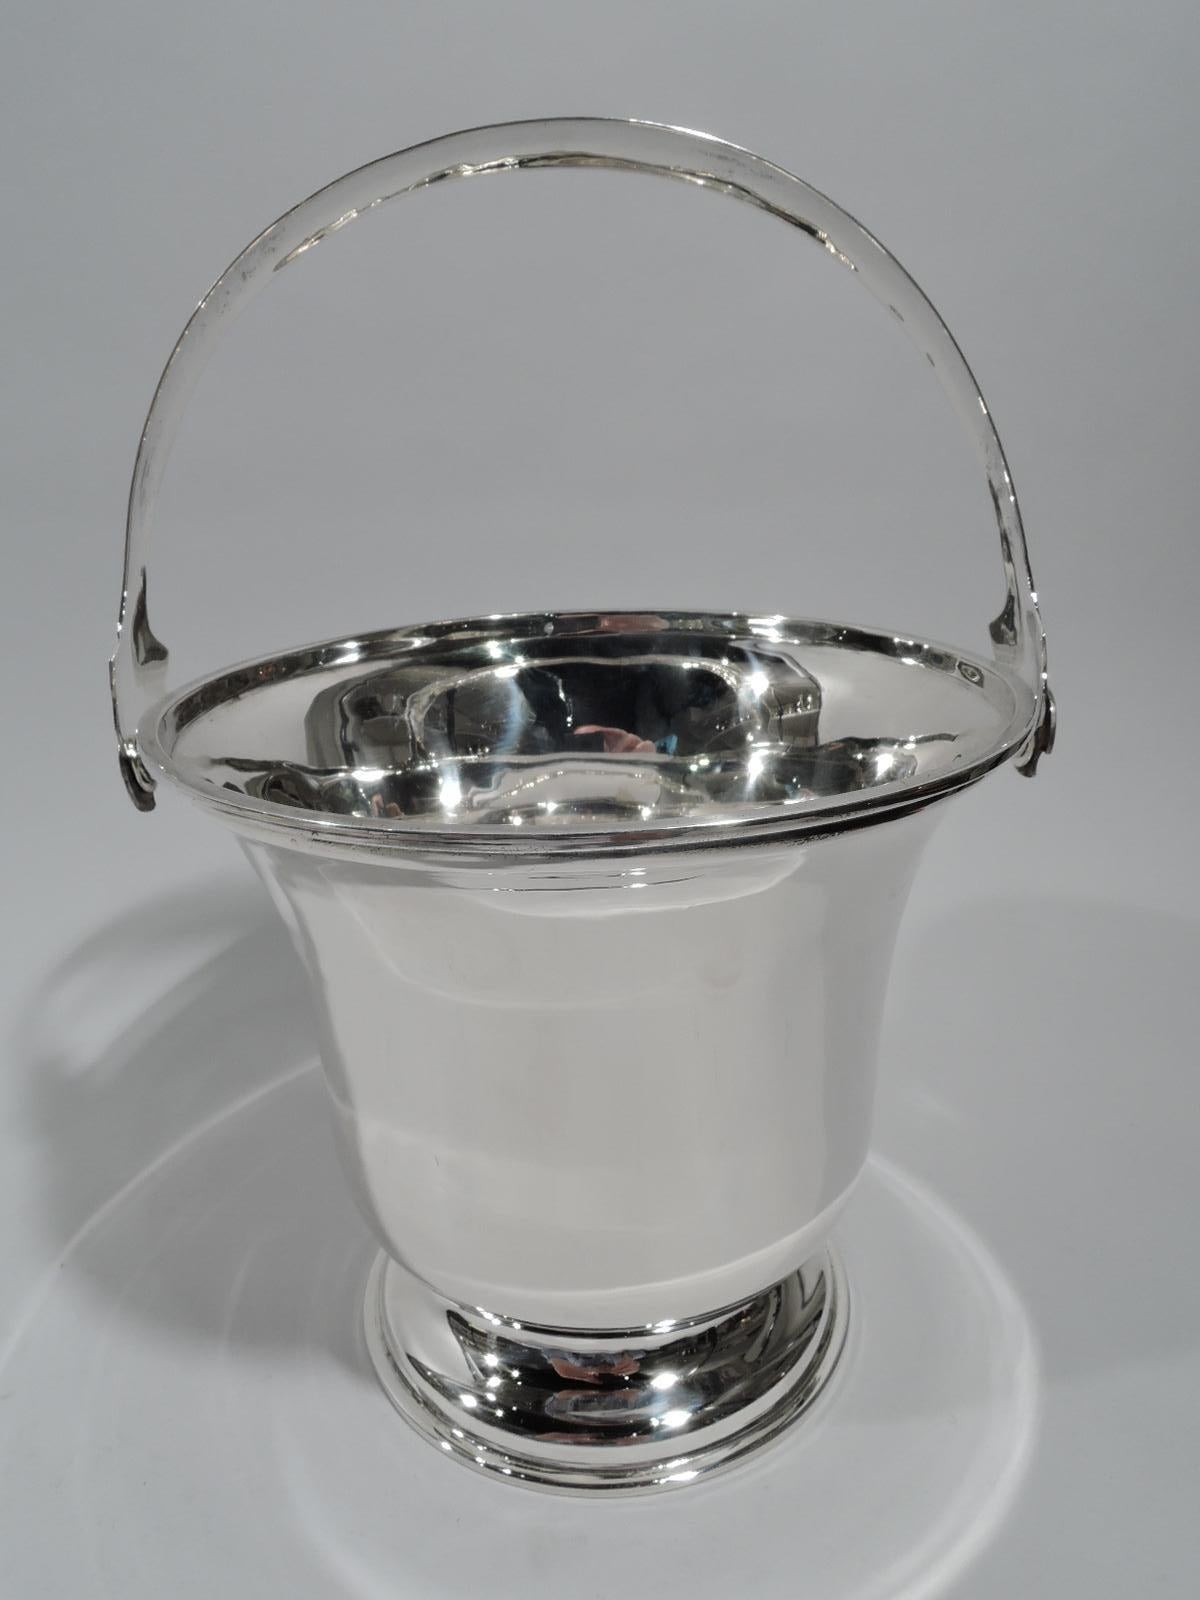 Mexican Modern sterling silver ice bucket. Bell-form bowl on raised foot. C-scroll swing handle with shaped terminals. A handy and portable bar accessory. Marked. 

Dimensions: H (with handle) 10 x W 7 x D 6 3/8 in. Weight: 17.5 troy ounces.